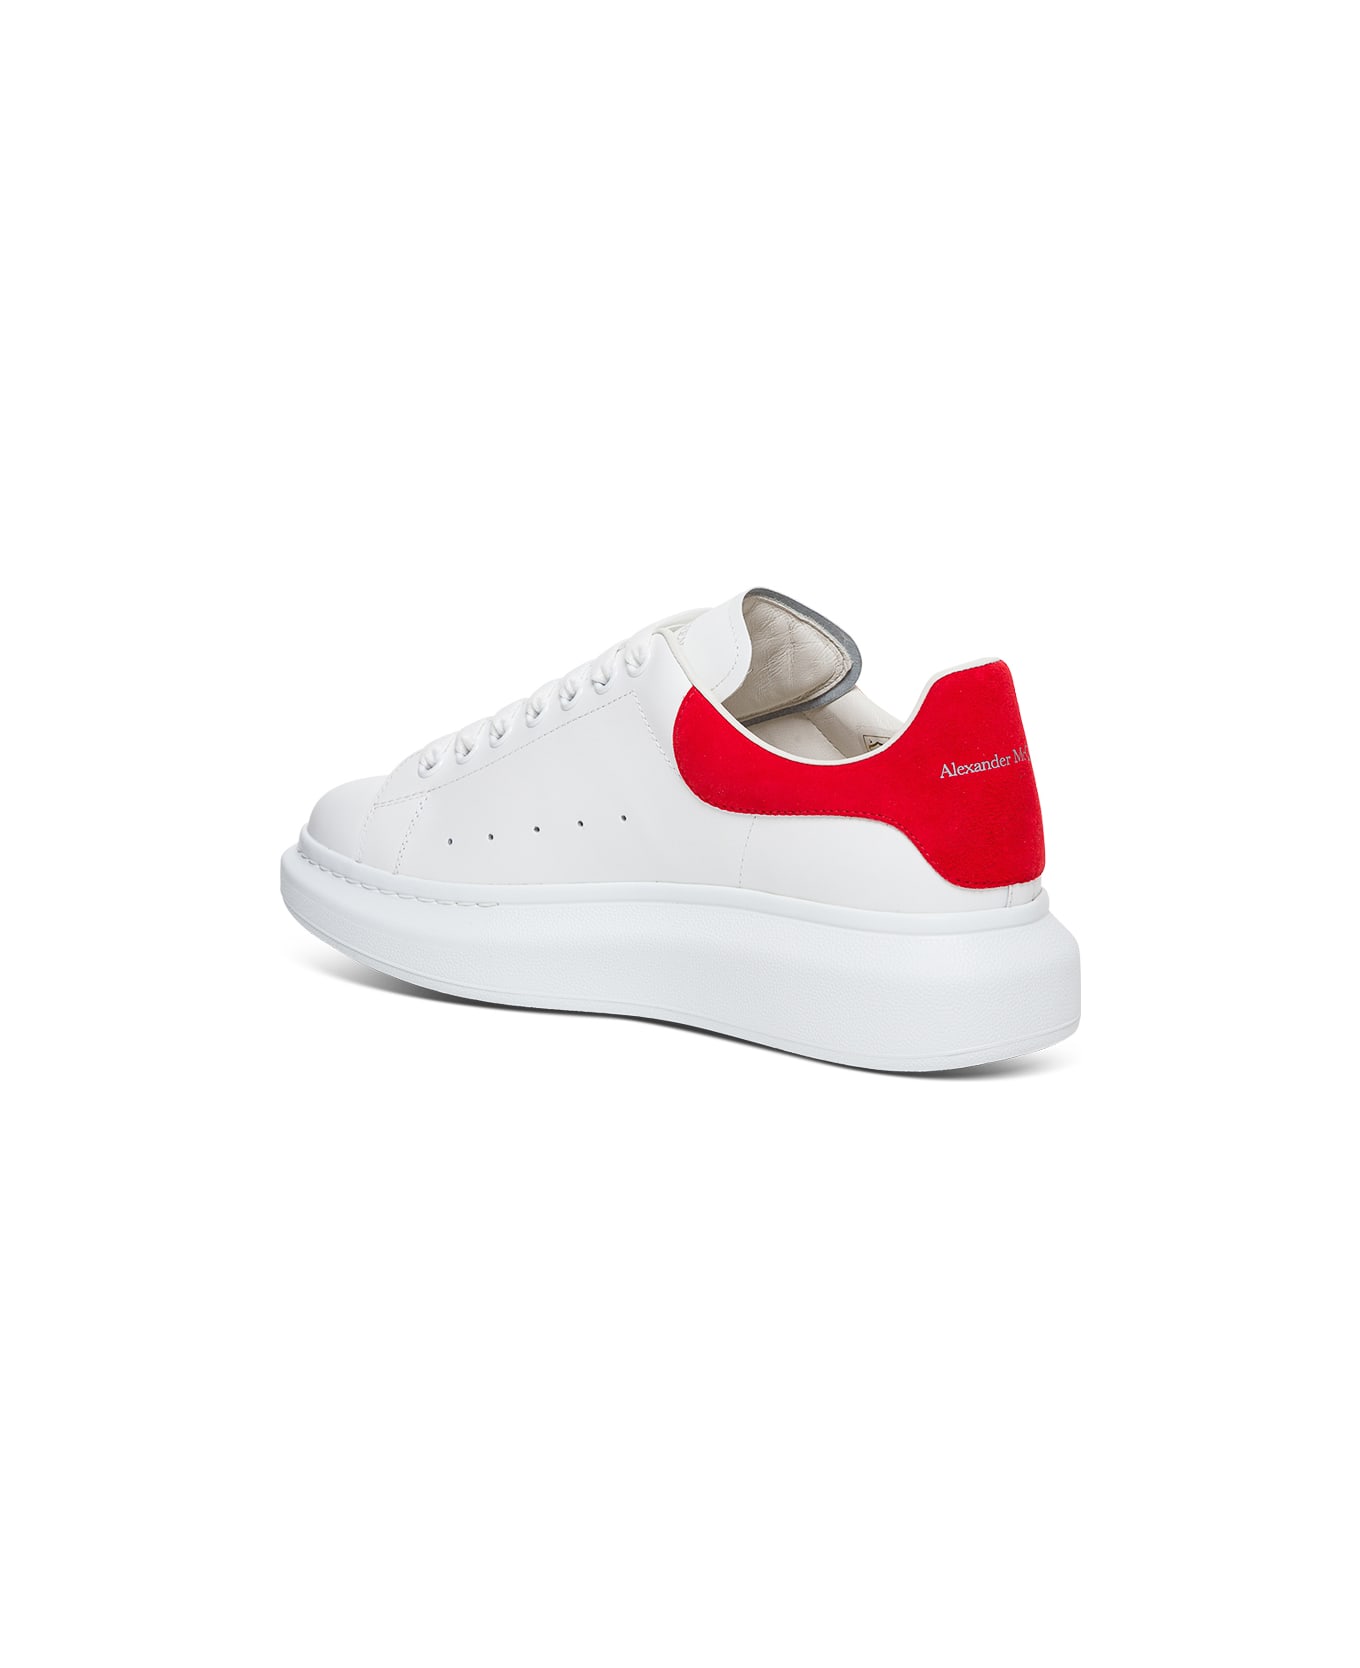 Alexander McQueen Woman 's White Leather With Red Heel Tab Oversize Sneakers - White